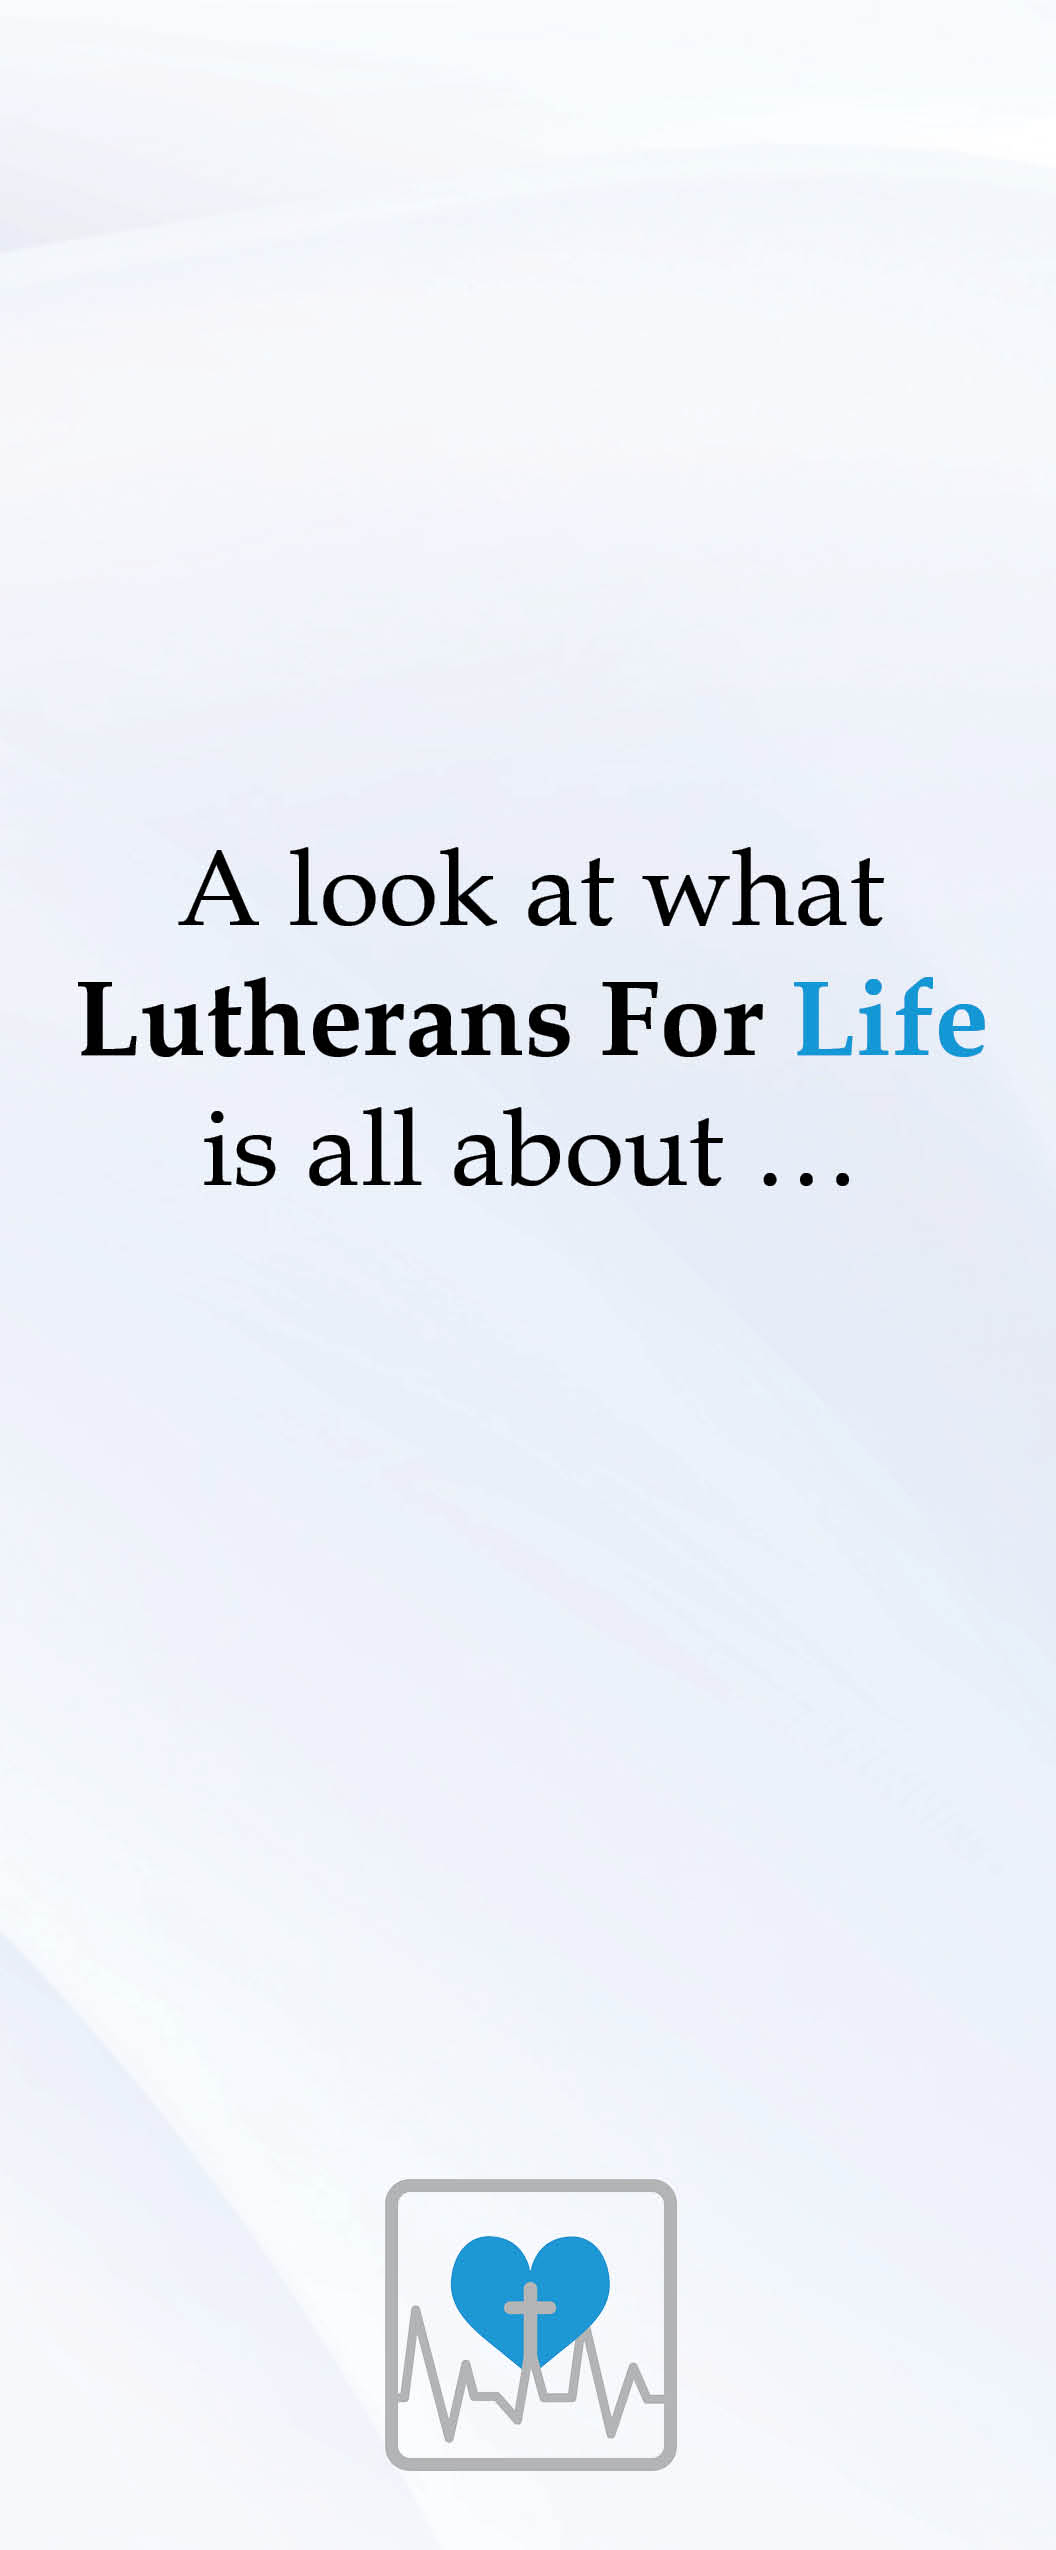 A Look at What Lutherans For Life Is All About